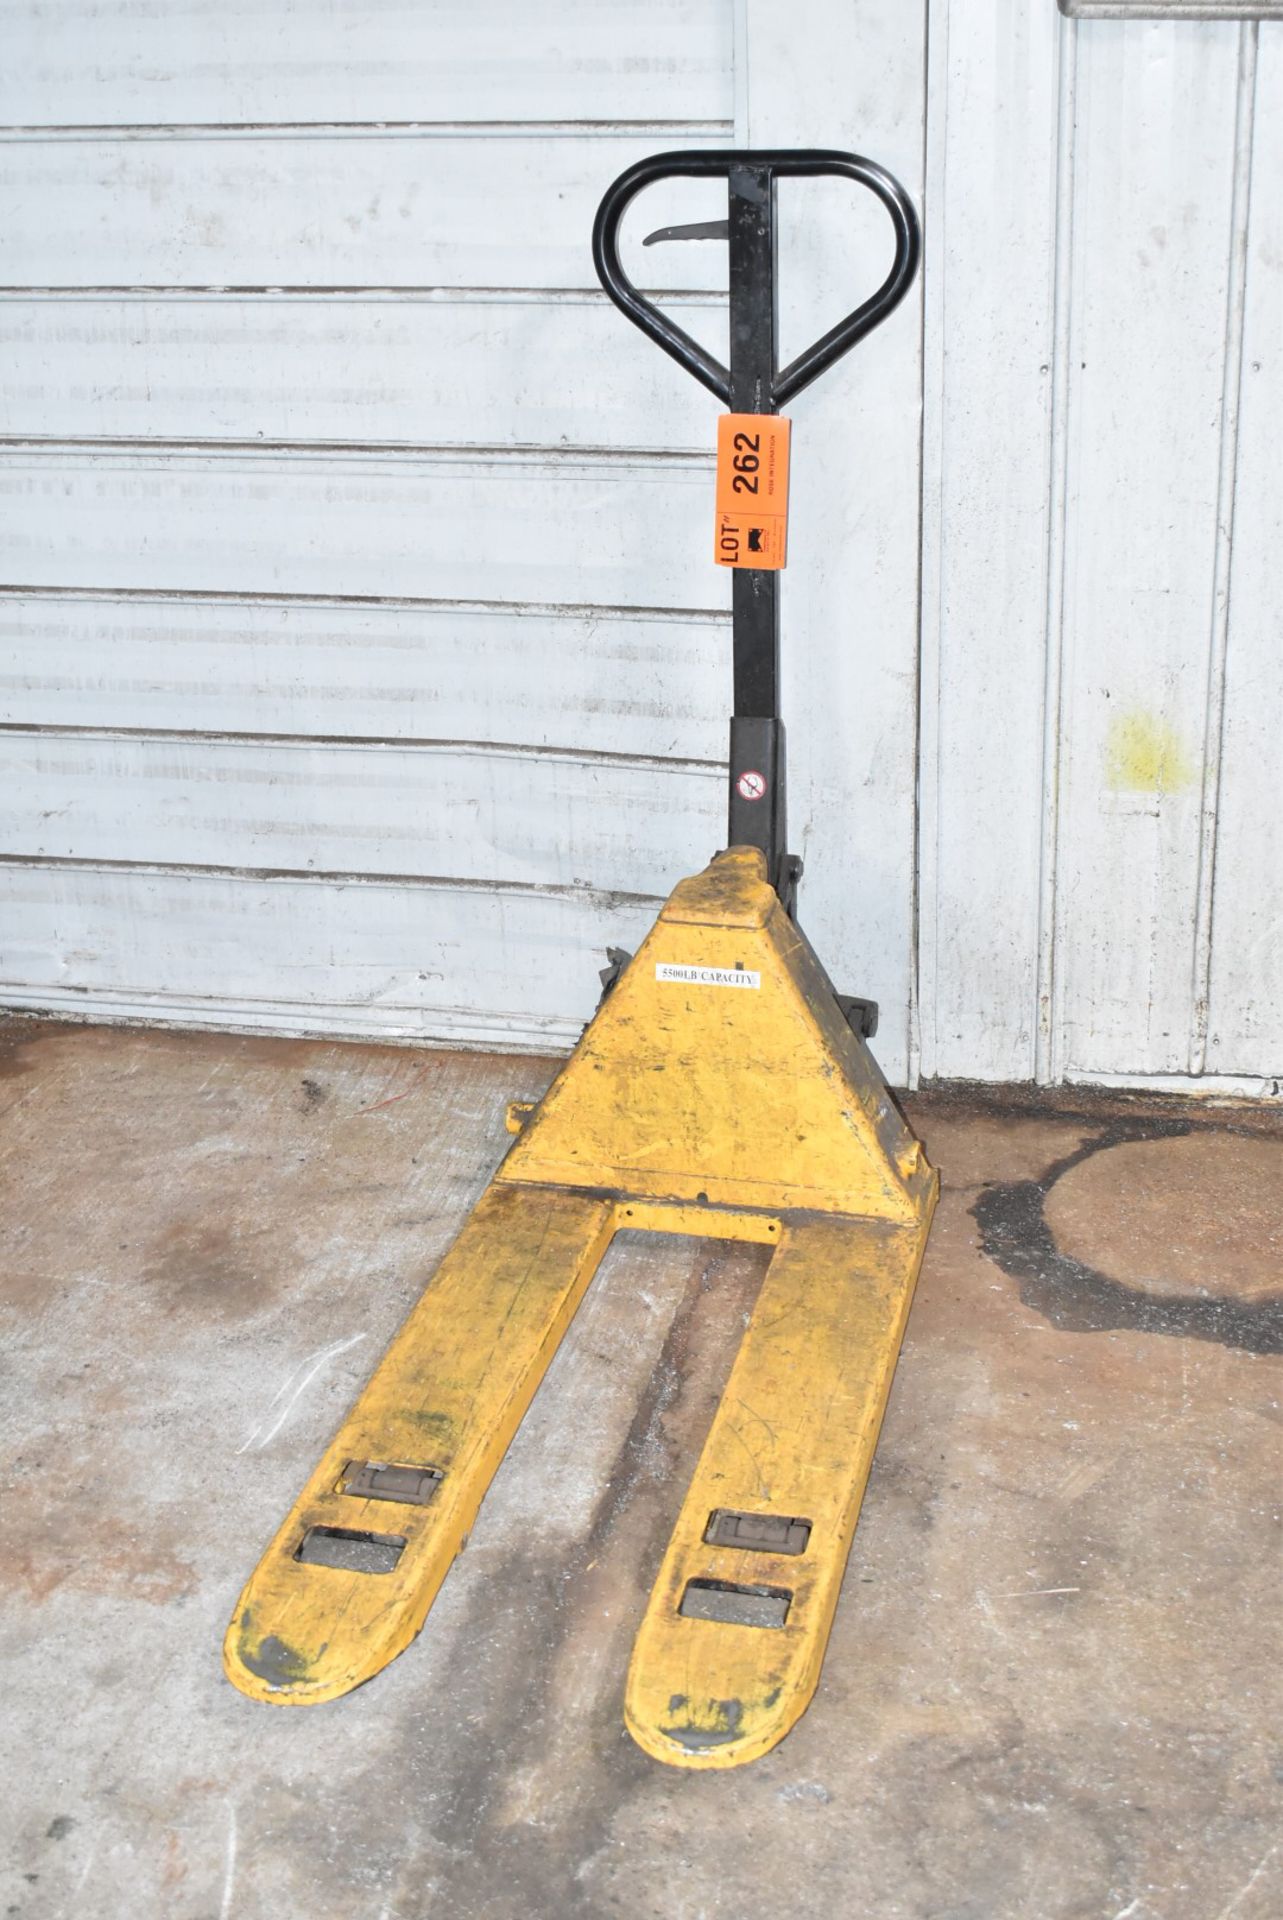 ULINE H-1366 HYDRAULIC PALLET JACK WITH 5,500 LB CAPACITY, S/N 376624